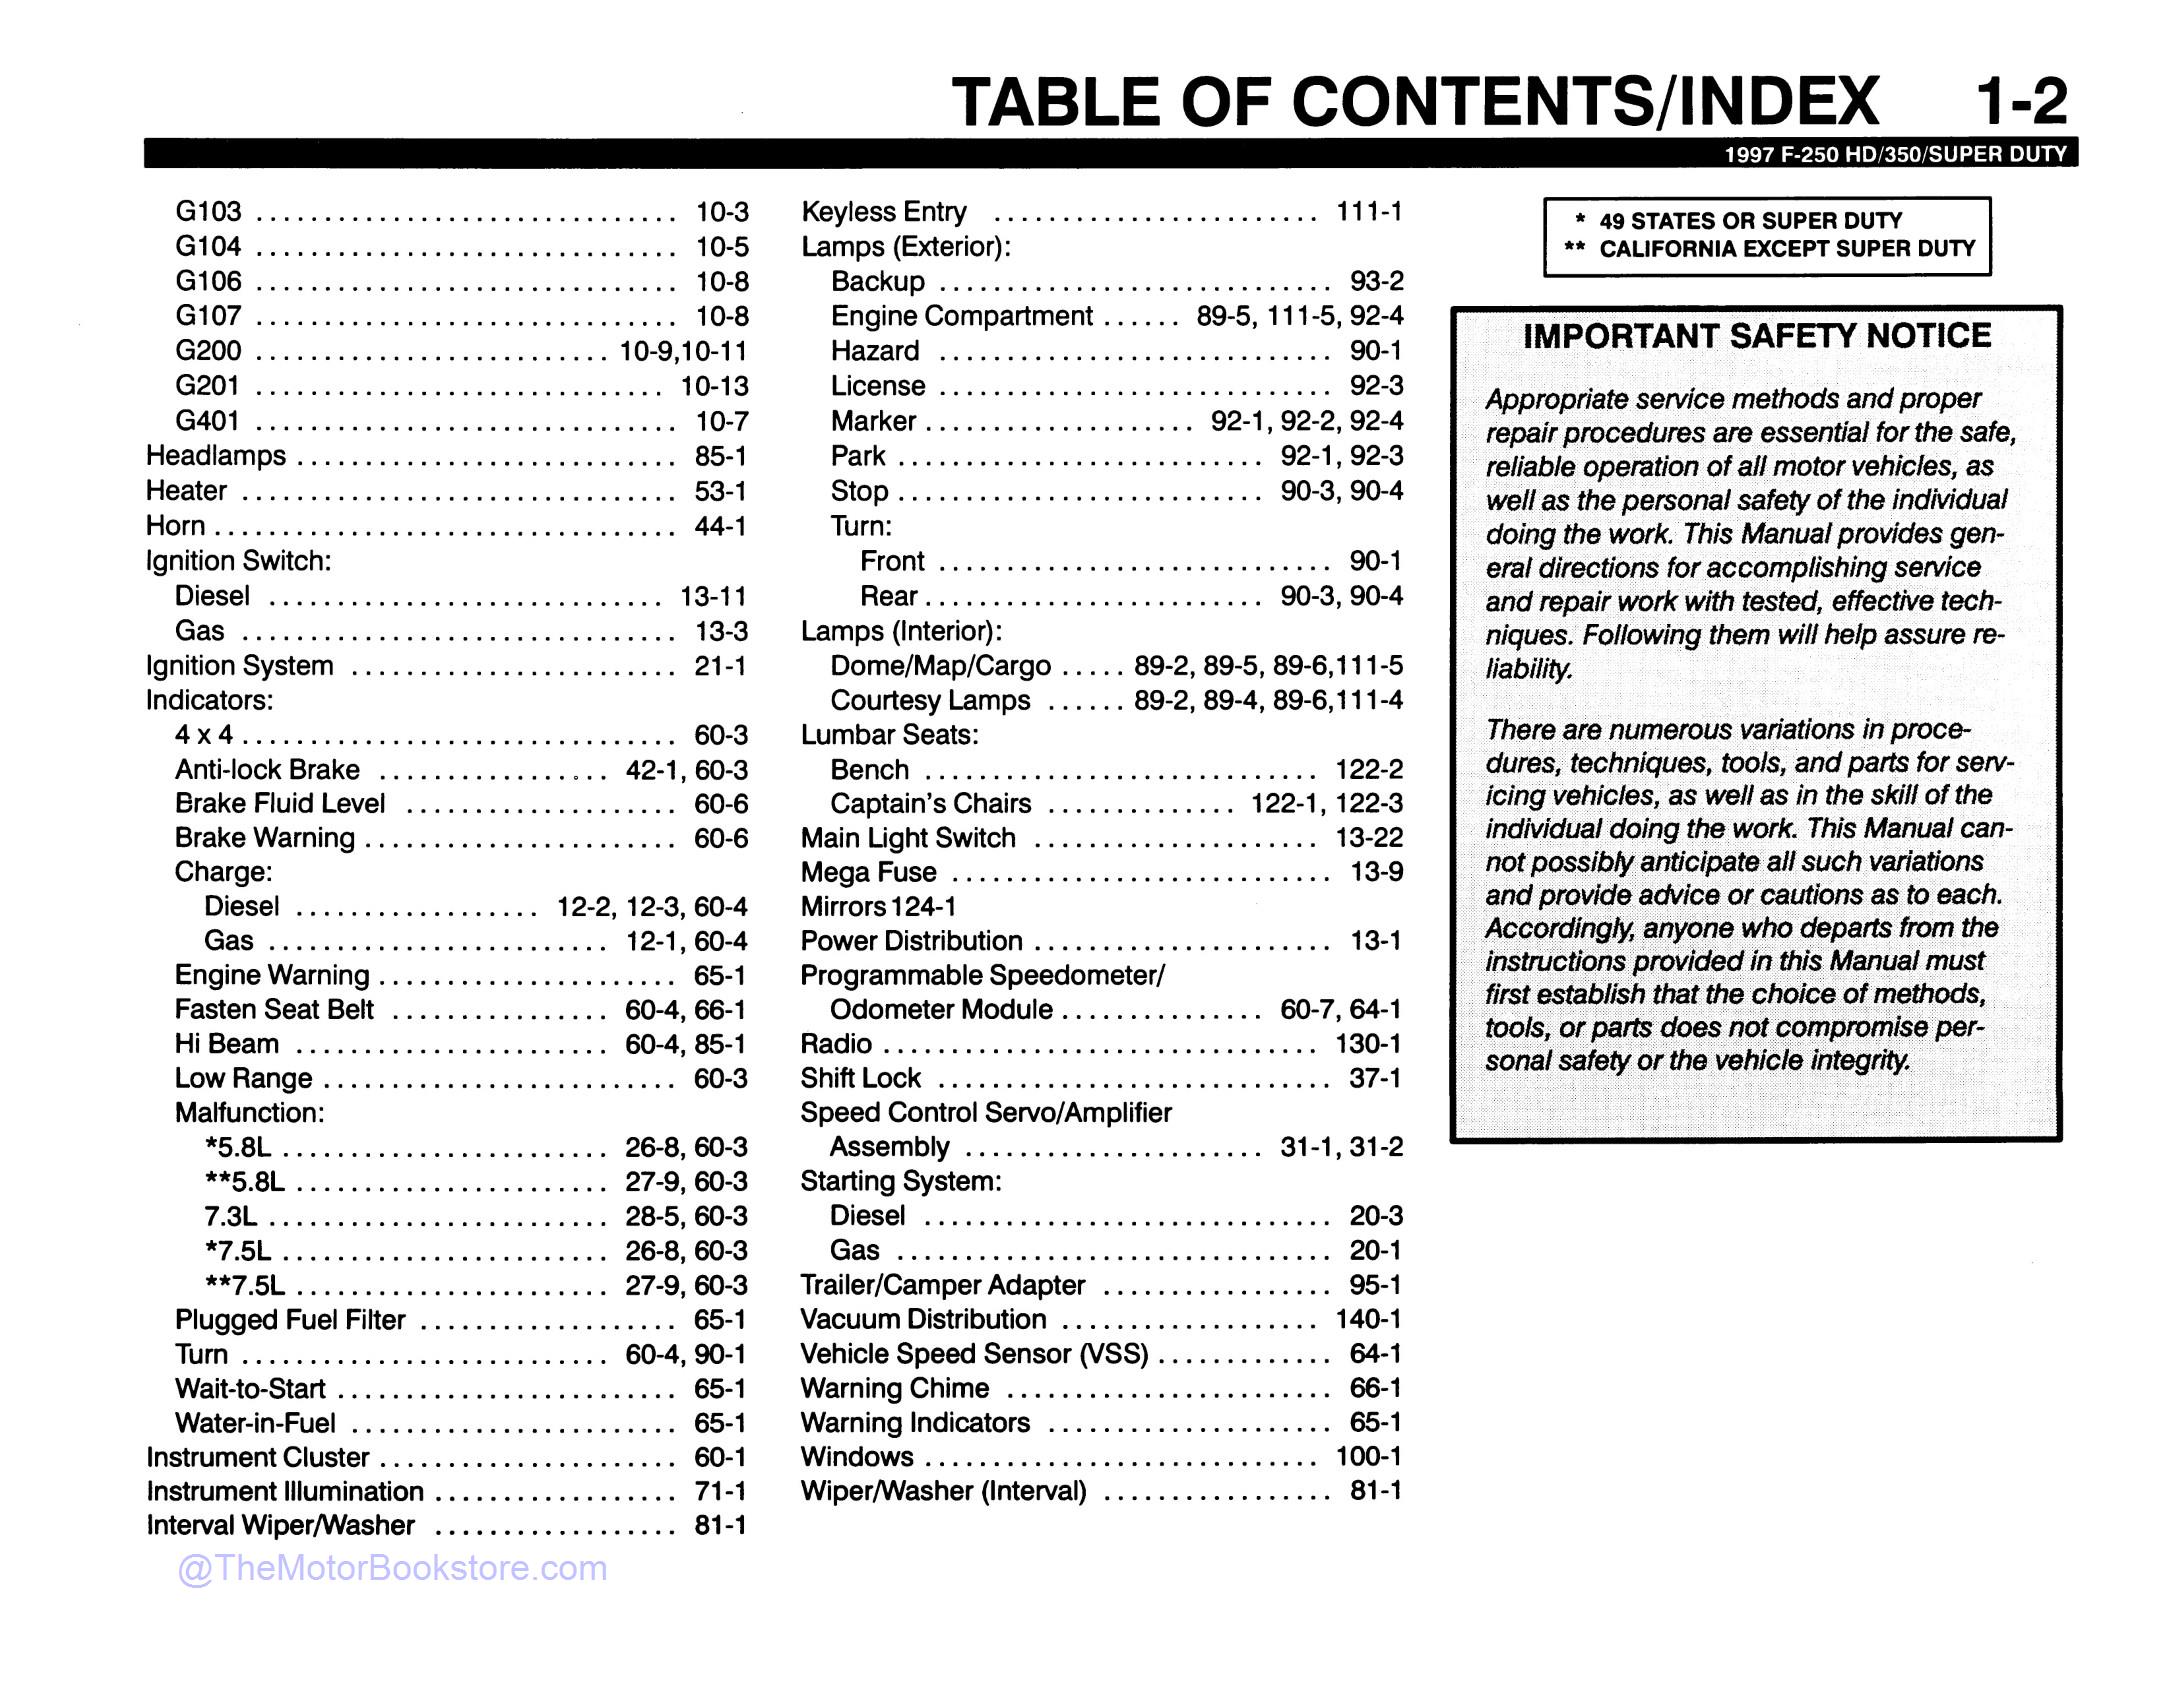 1997 Ford F-250 HD, F-350, F-Super Duty Electrical Manual  - Table of Contents 2